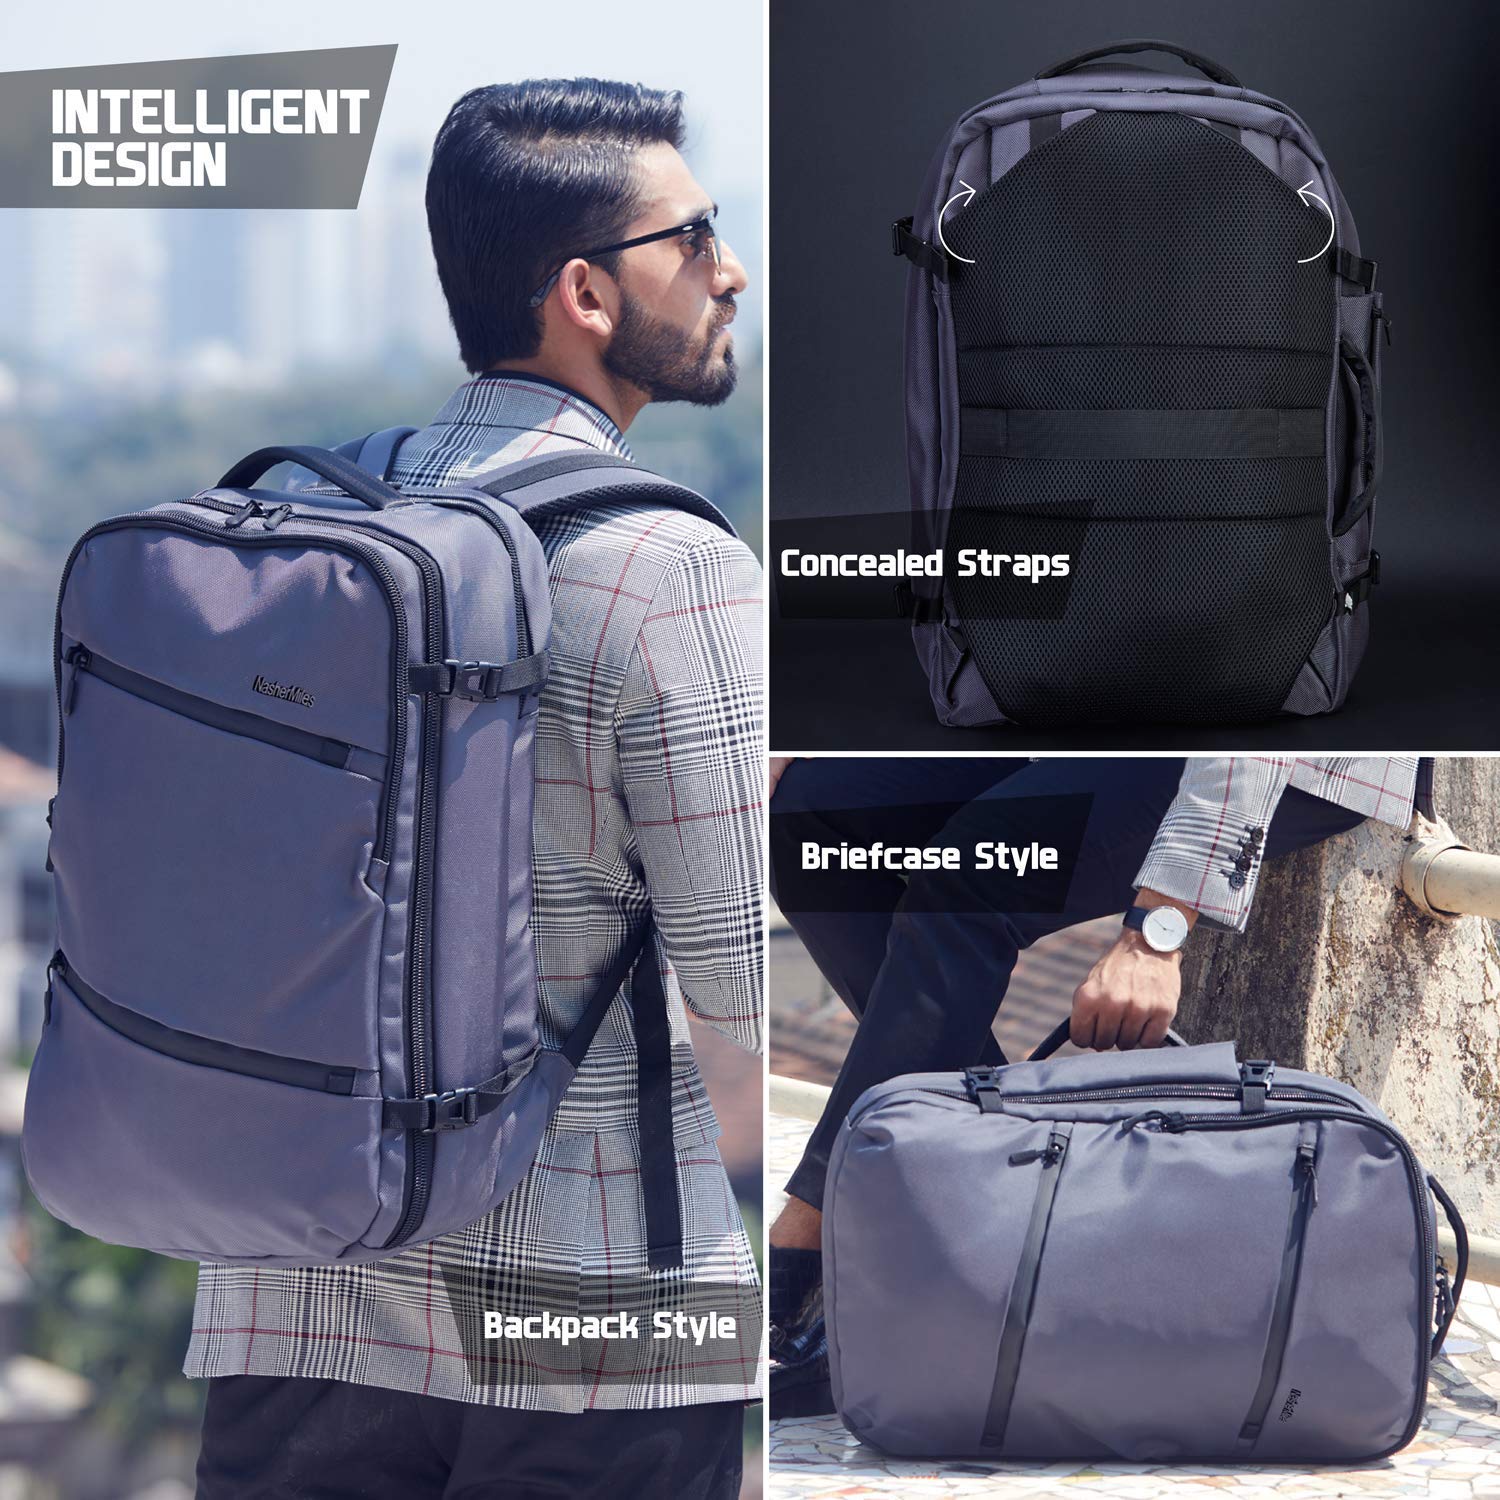 Lima Corporate Backpack